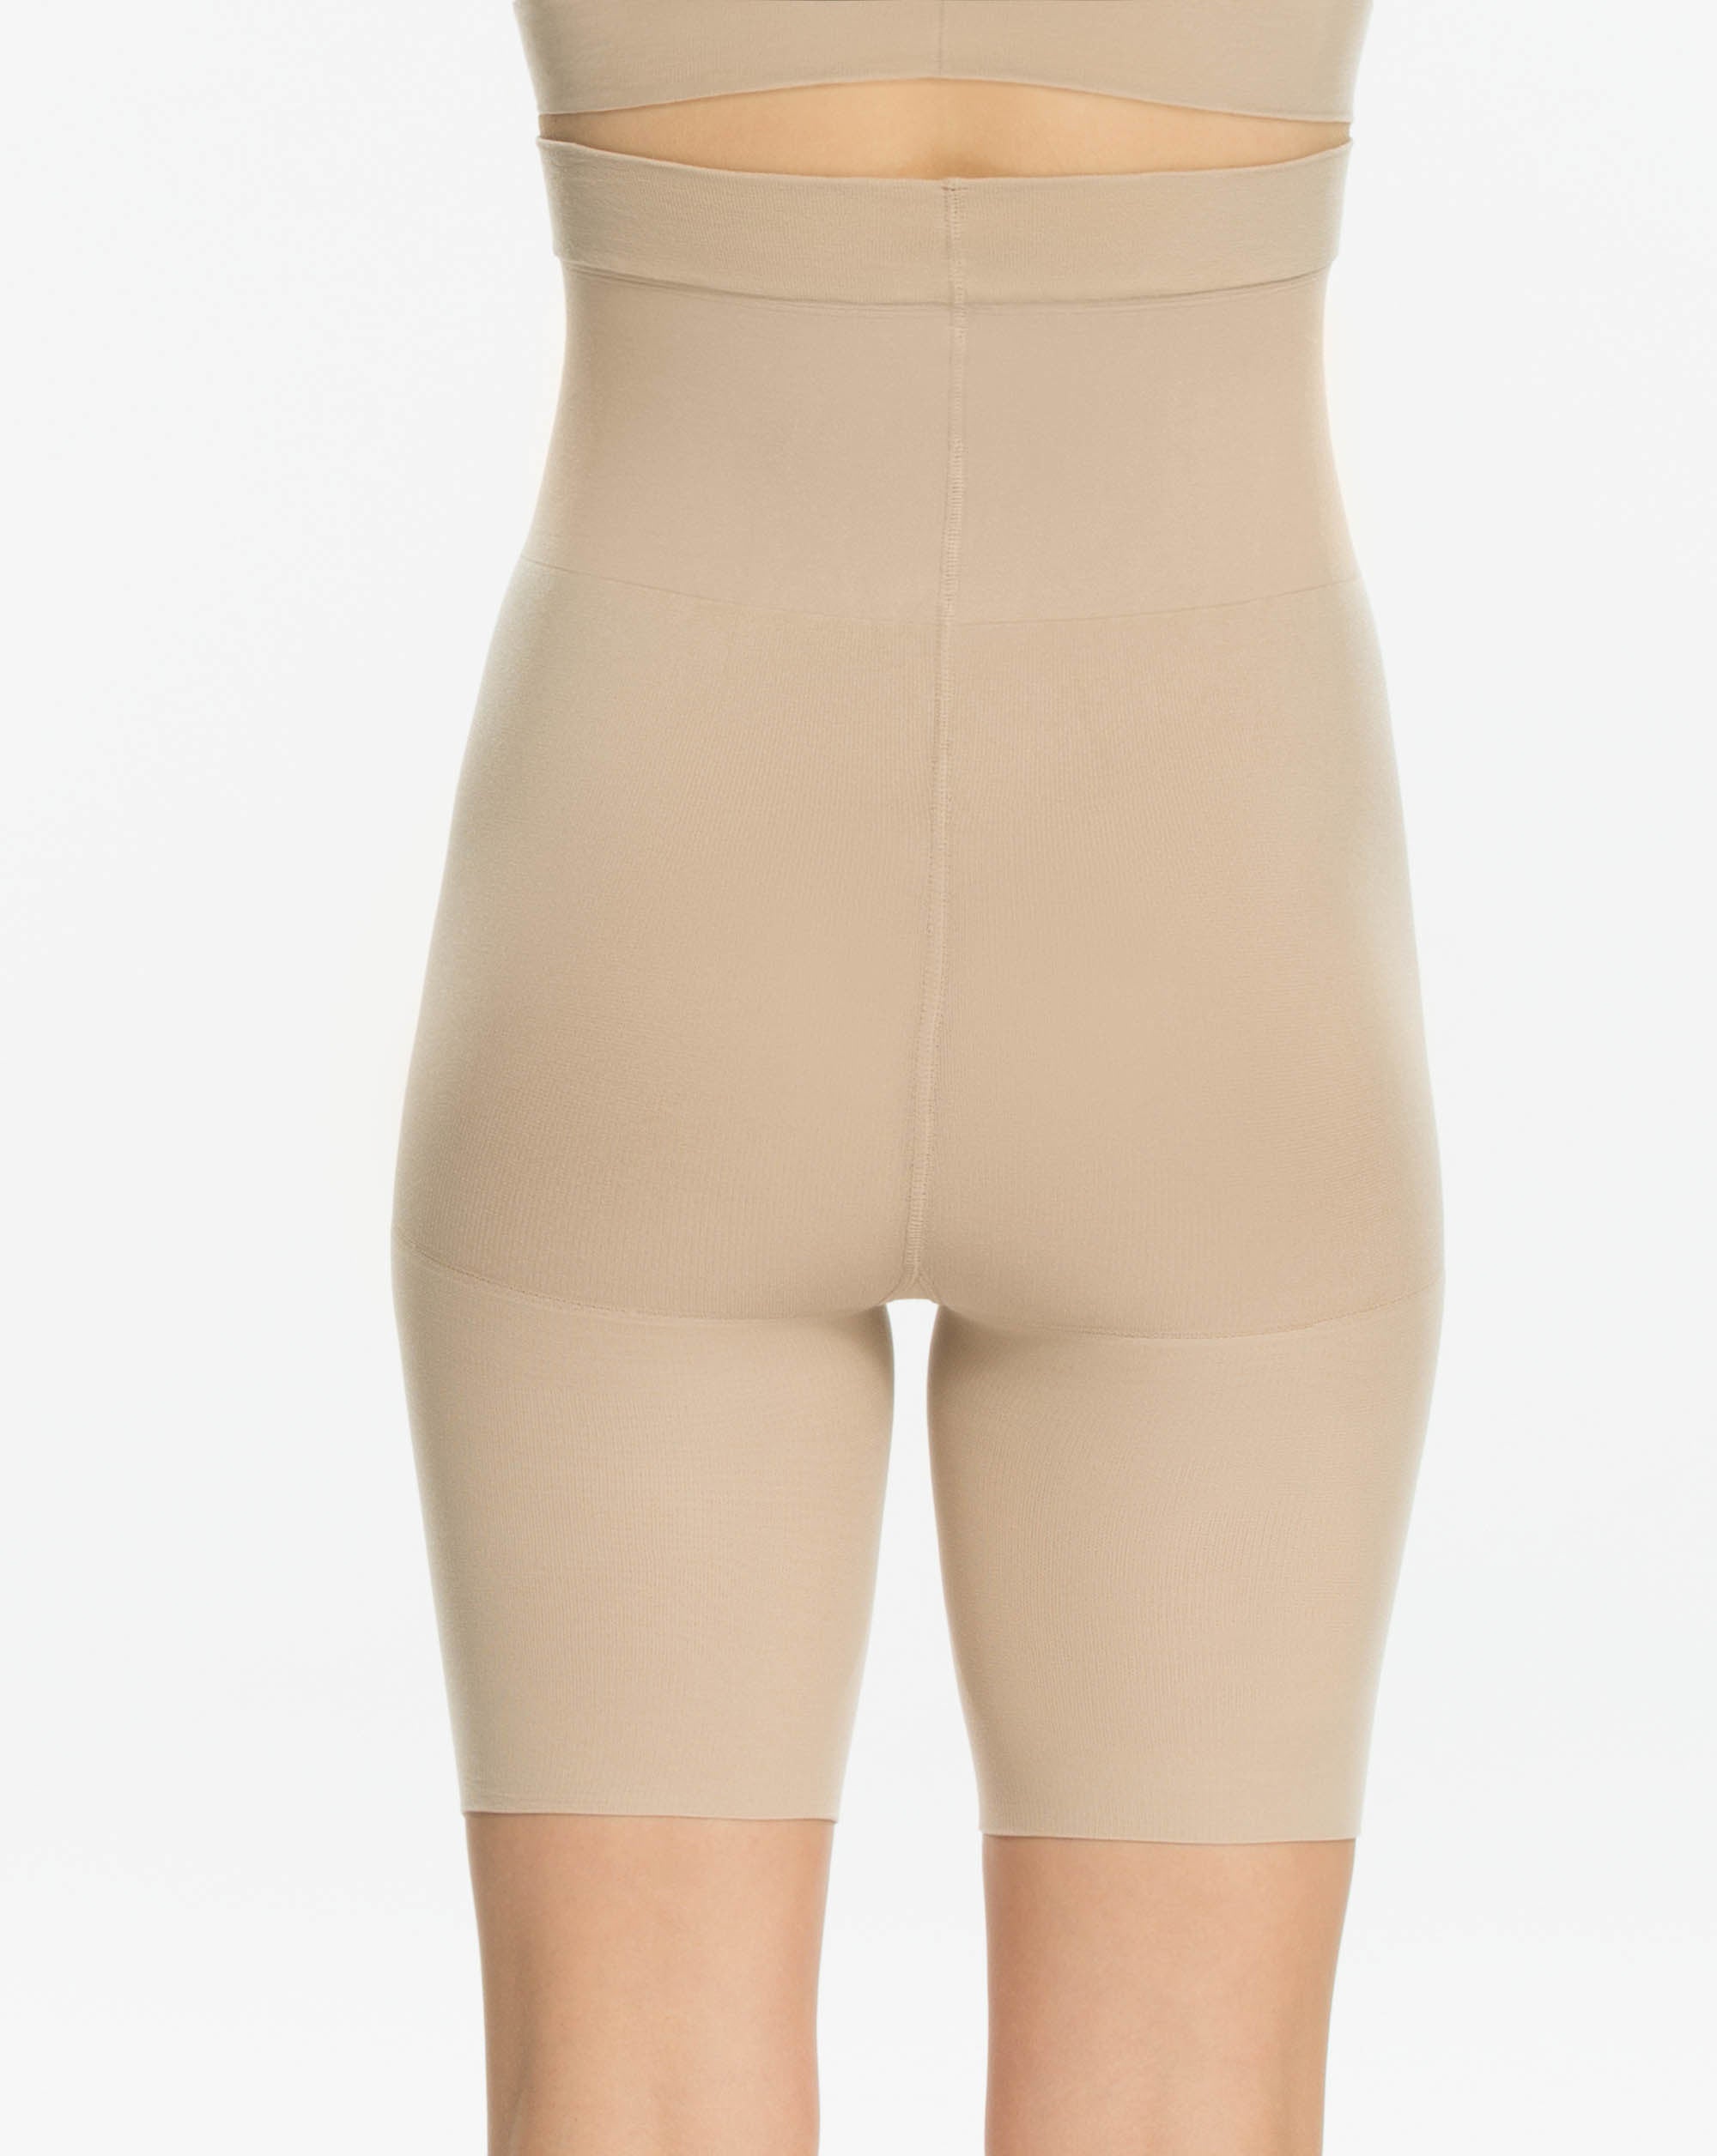 Spanx Target Canada Clearance